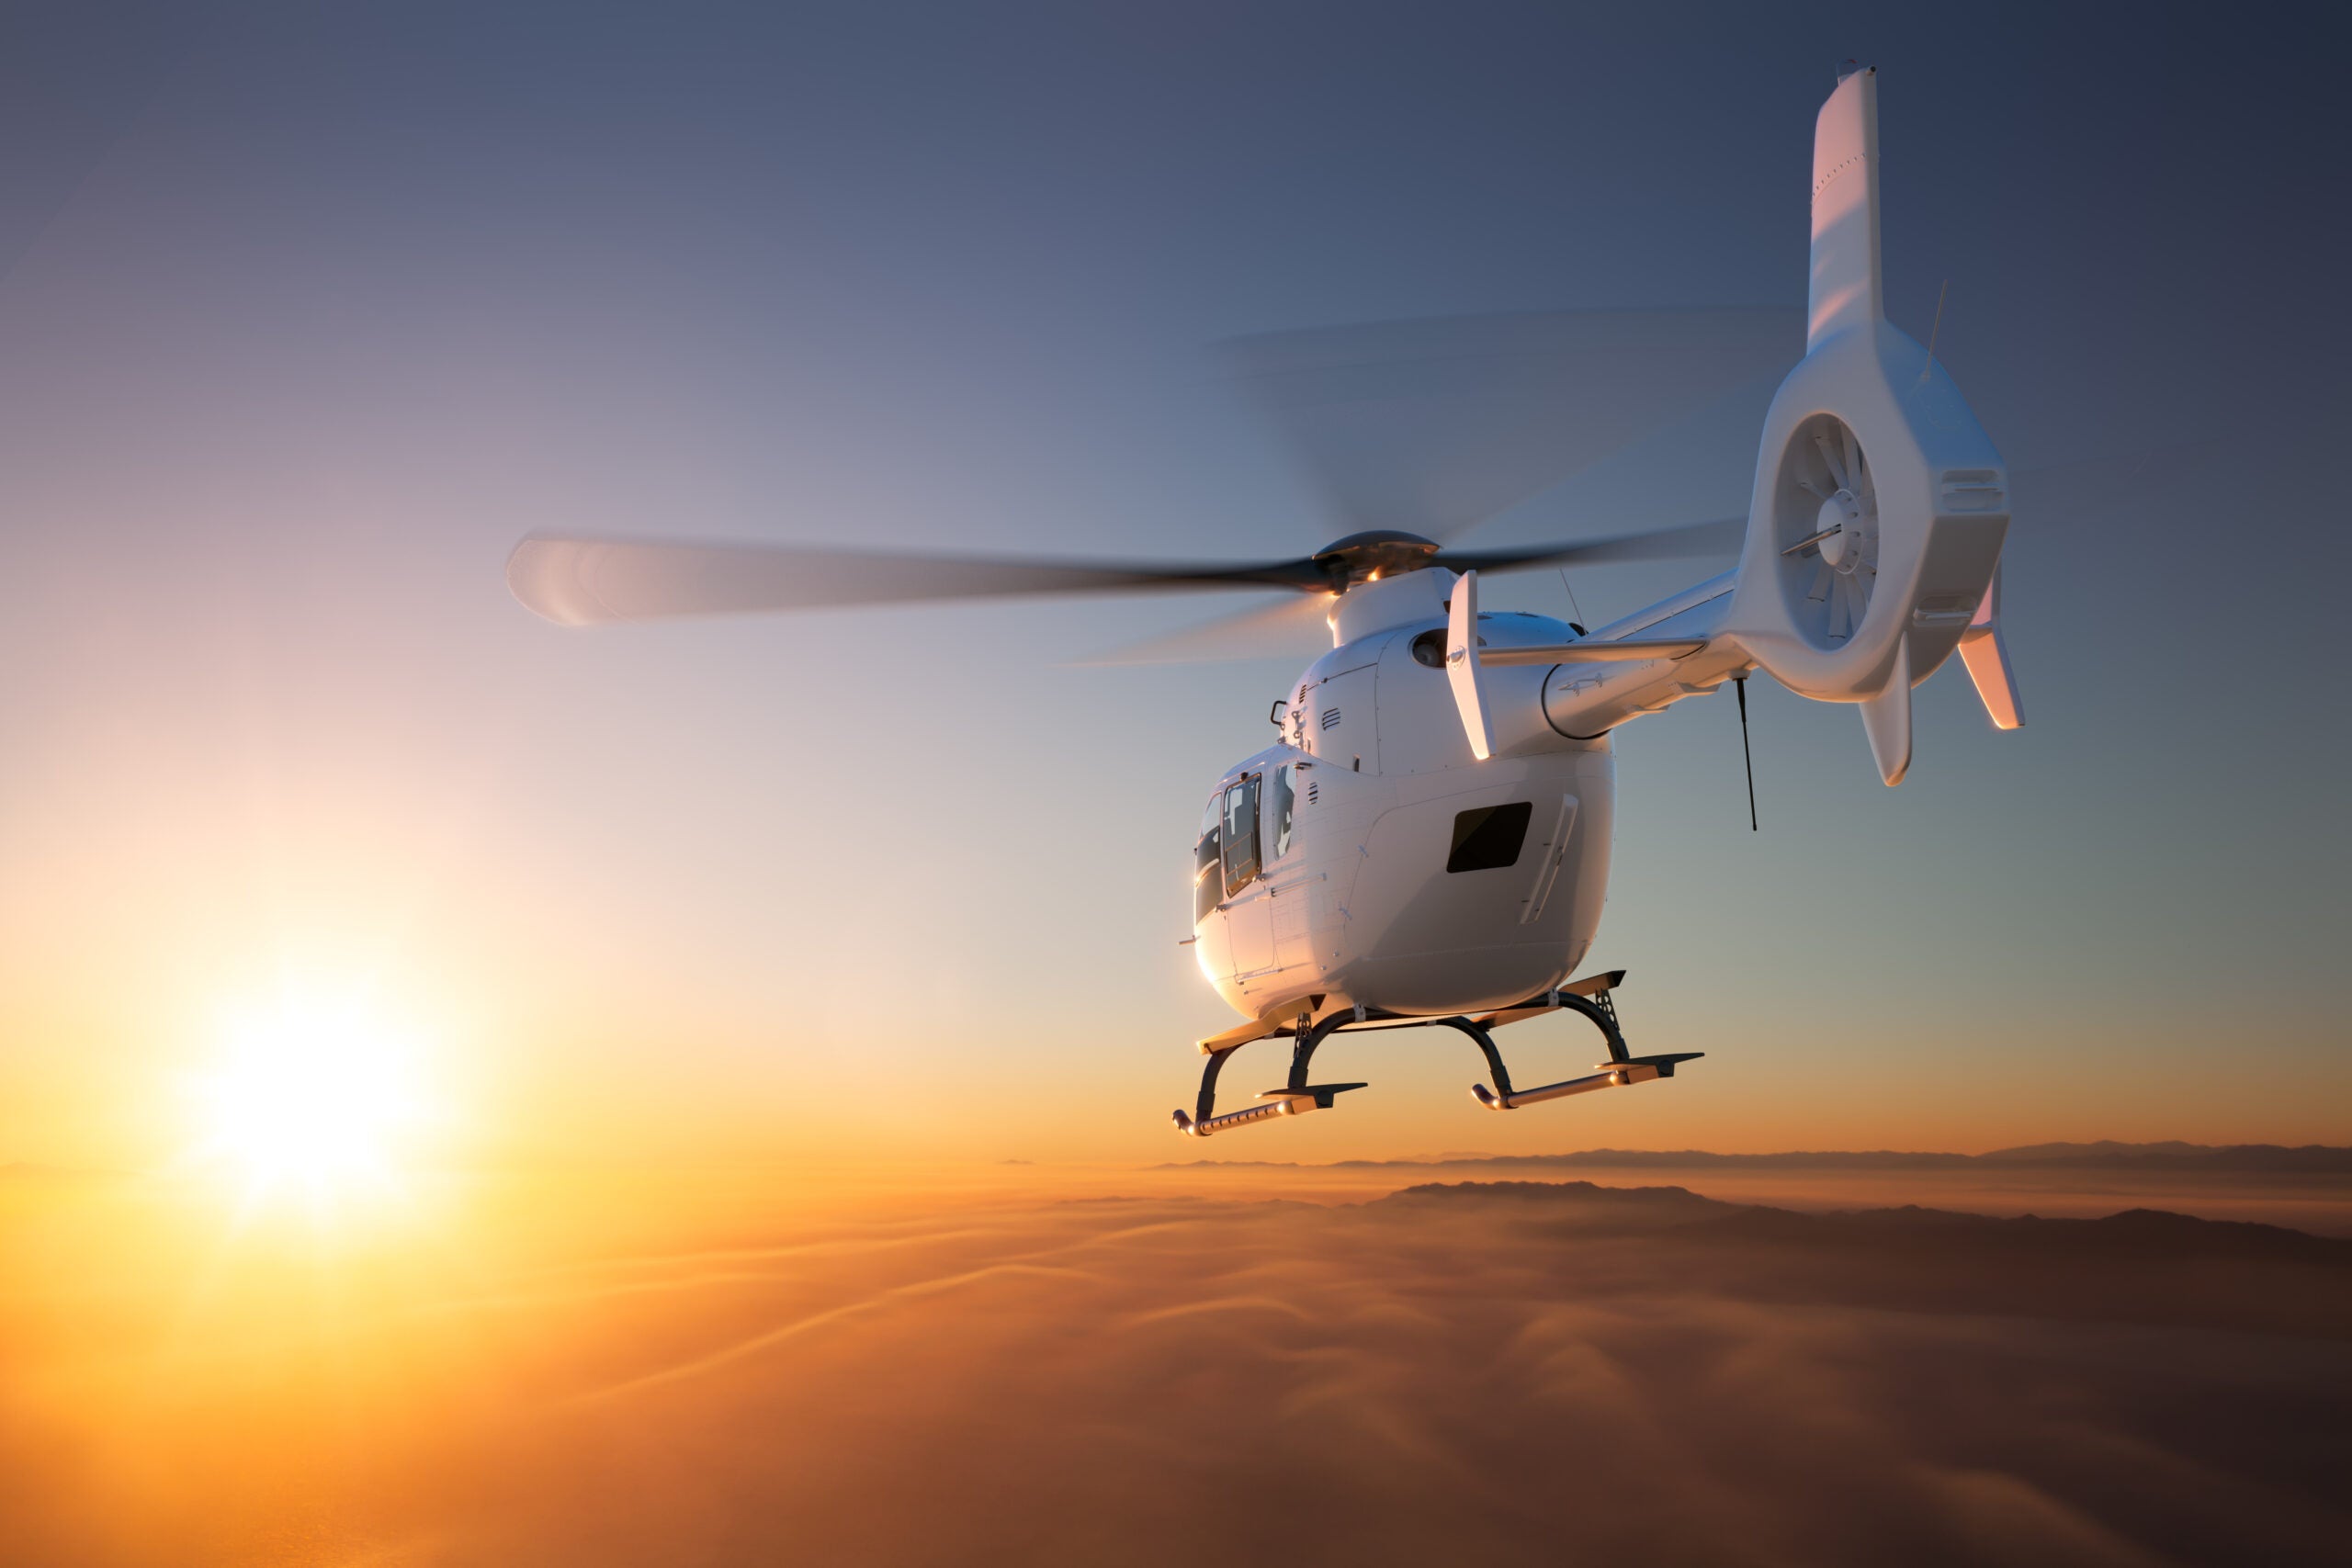 Is This the Beginning of the End for Helicopters?